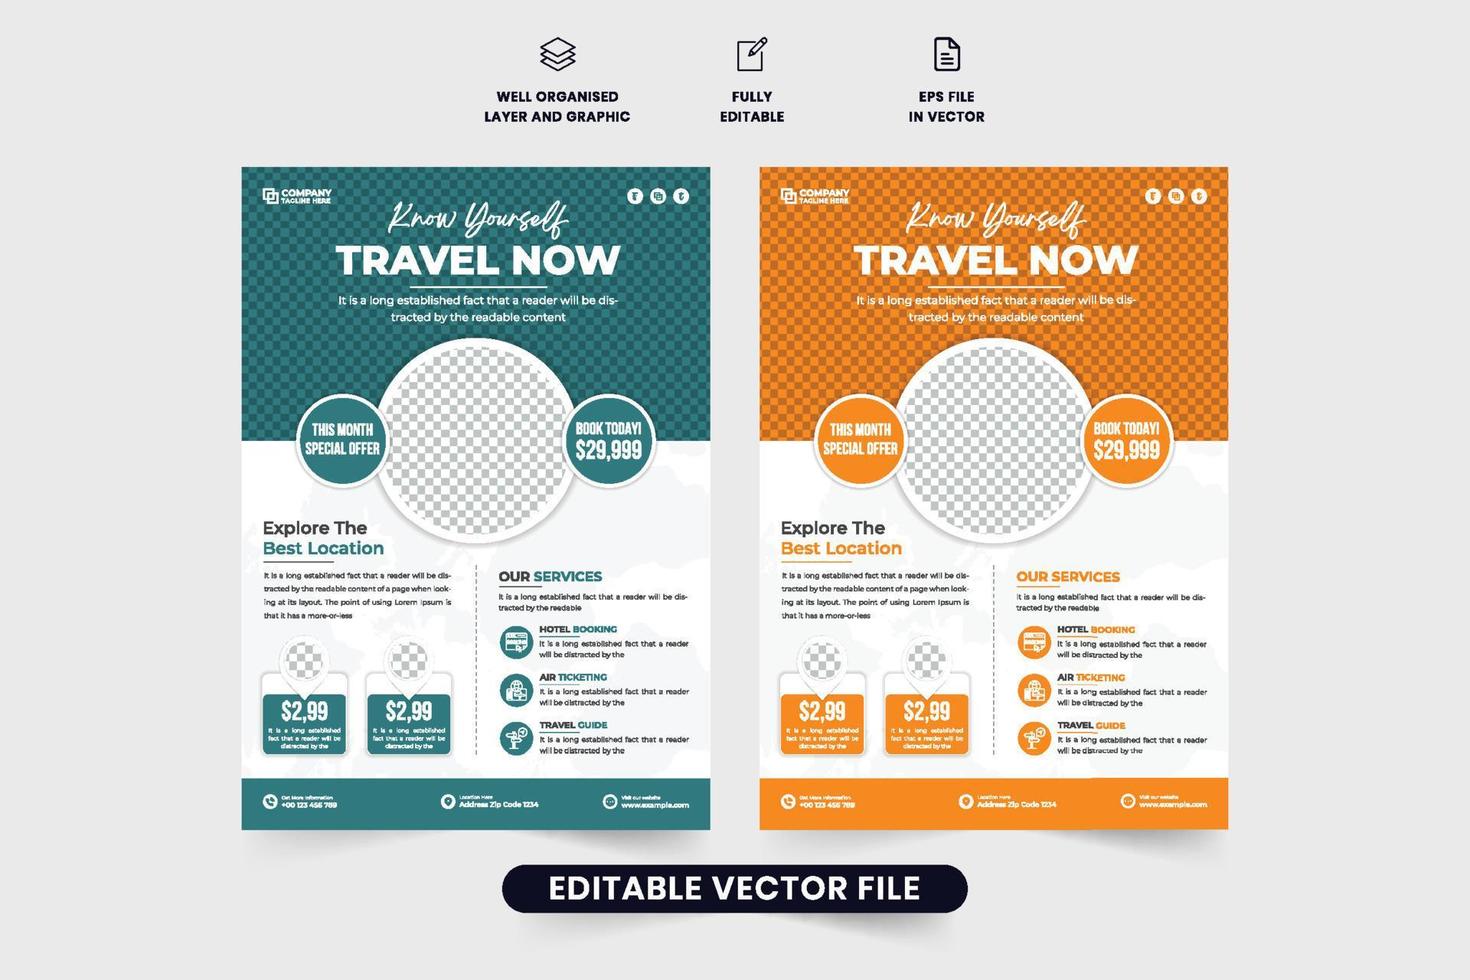 Travel agency advertisement poster and flyer vector for marketing. Touring group flyer template design with discount sections and photo placeholders. Vacation planner leaflet decoration for marketing.